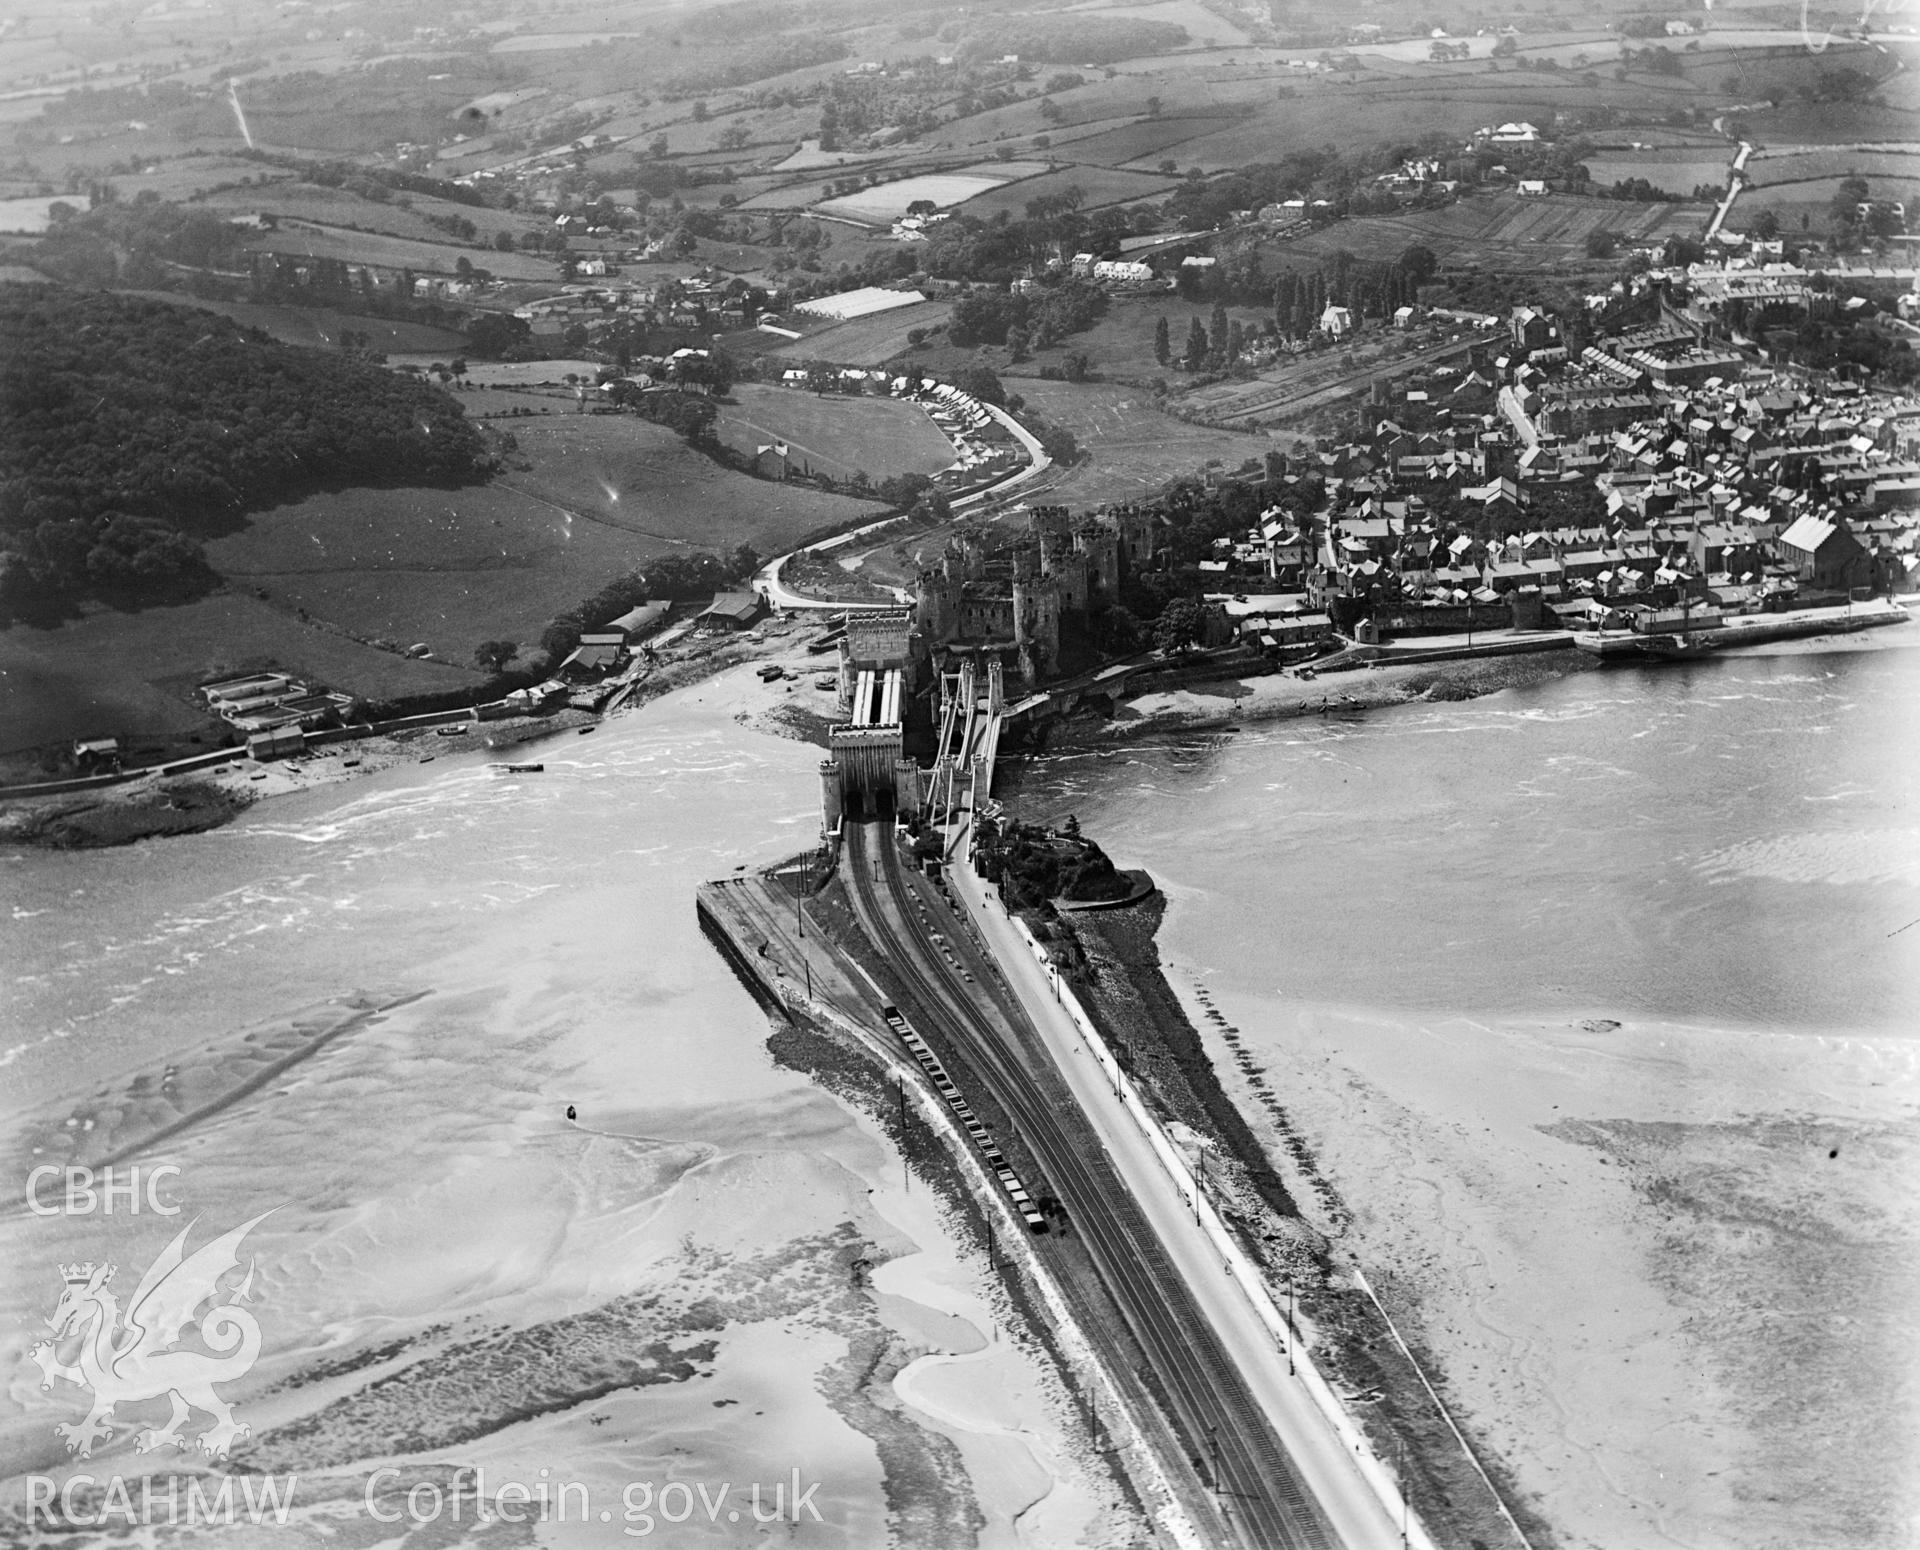 View of Conwy showing railway and causeway, oblique aerial view. 5?x4? black and white glass plate negative.